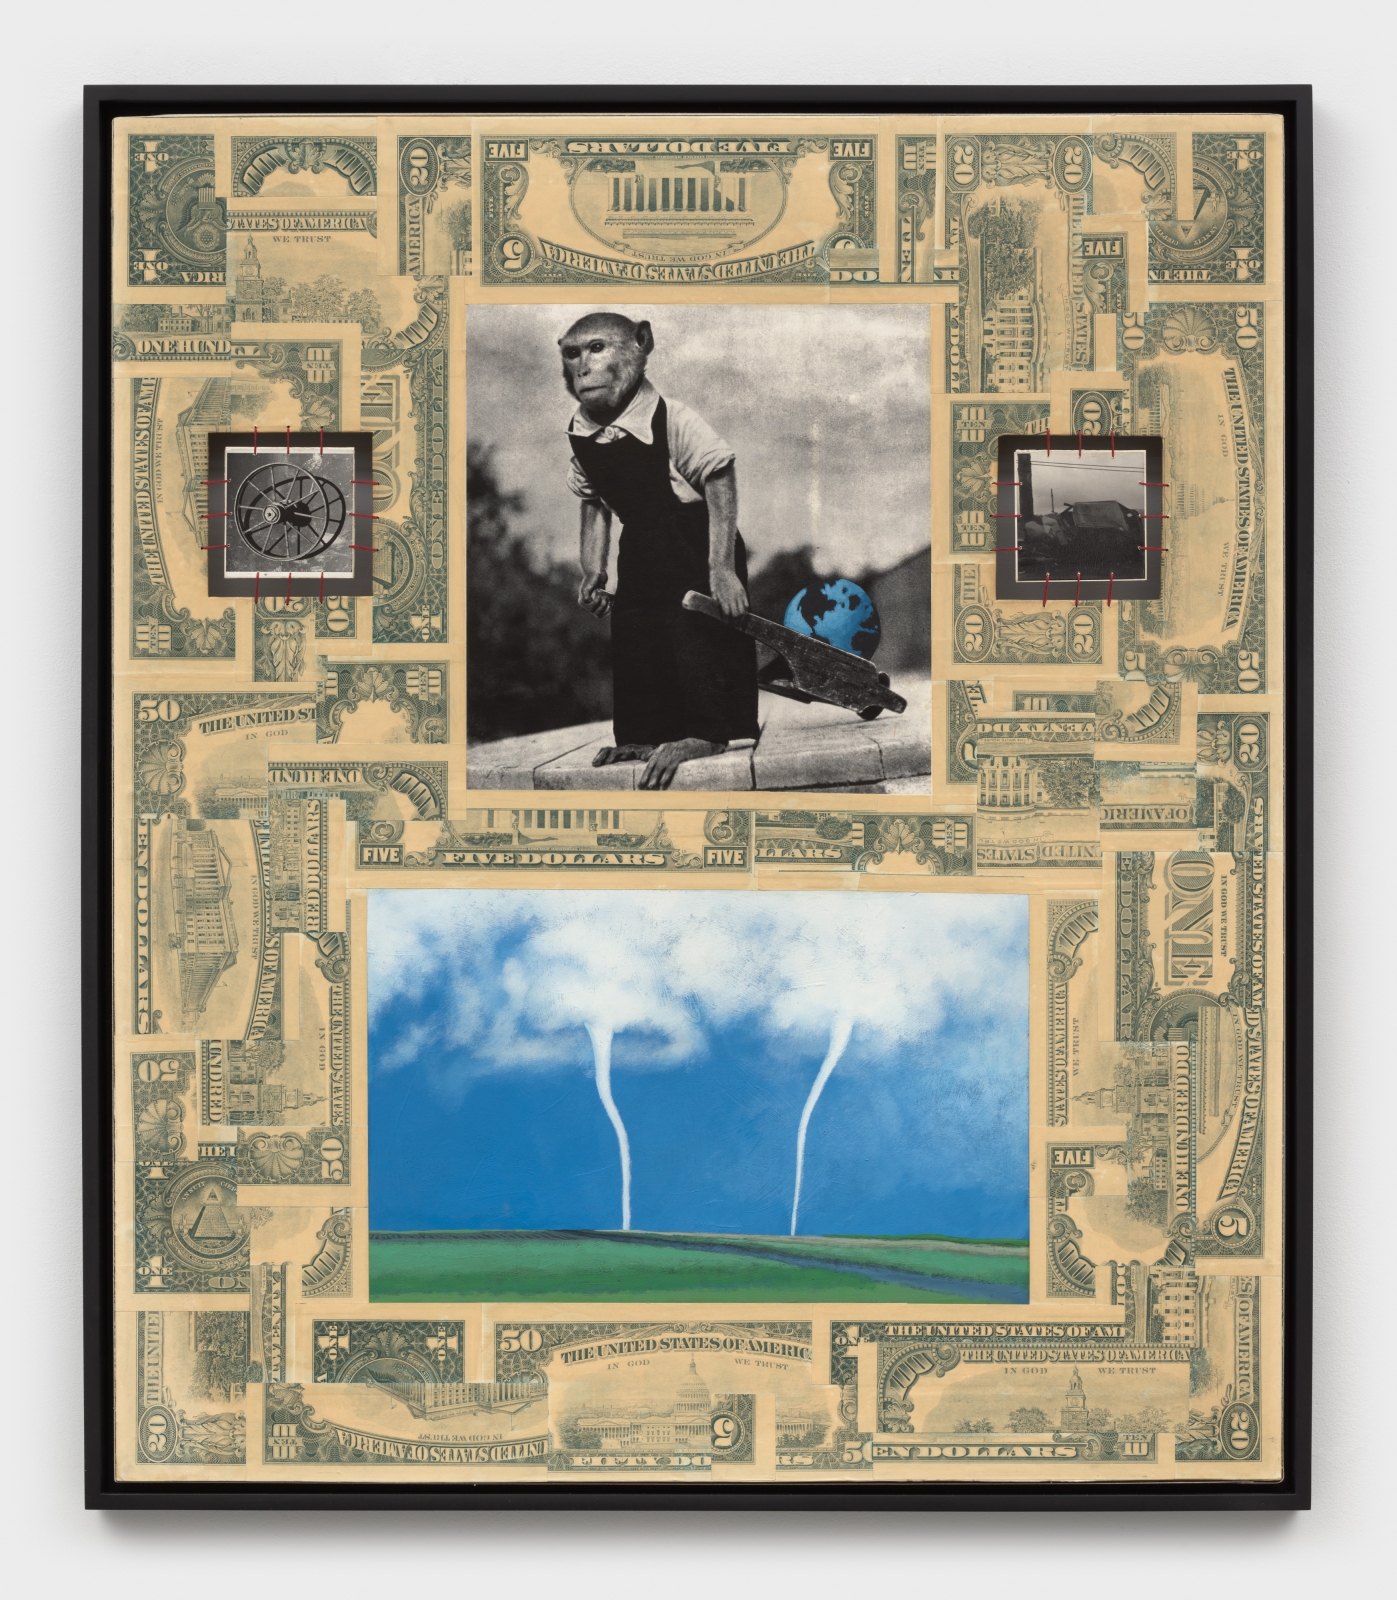 David Wojnarowicz
Fear of Evolution, 1988-89
black and white photographs, acrylic, string, and collage on masonite
42 1/2 x 36 1/2 ins.
108 x 92.7 cm